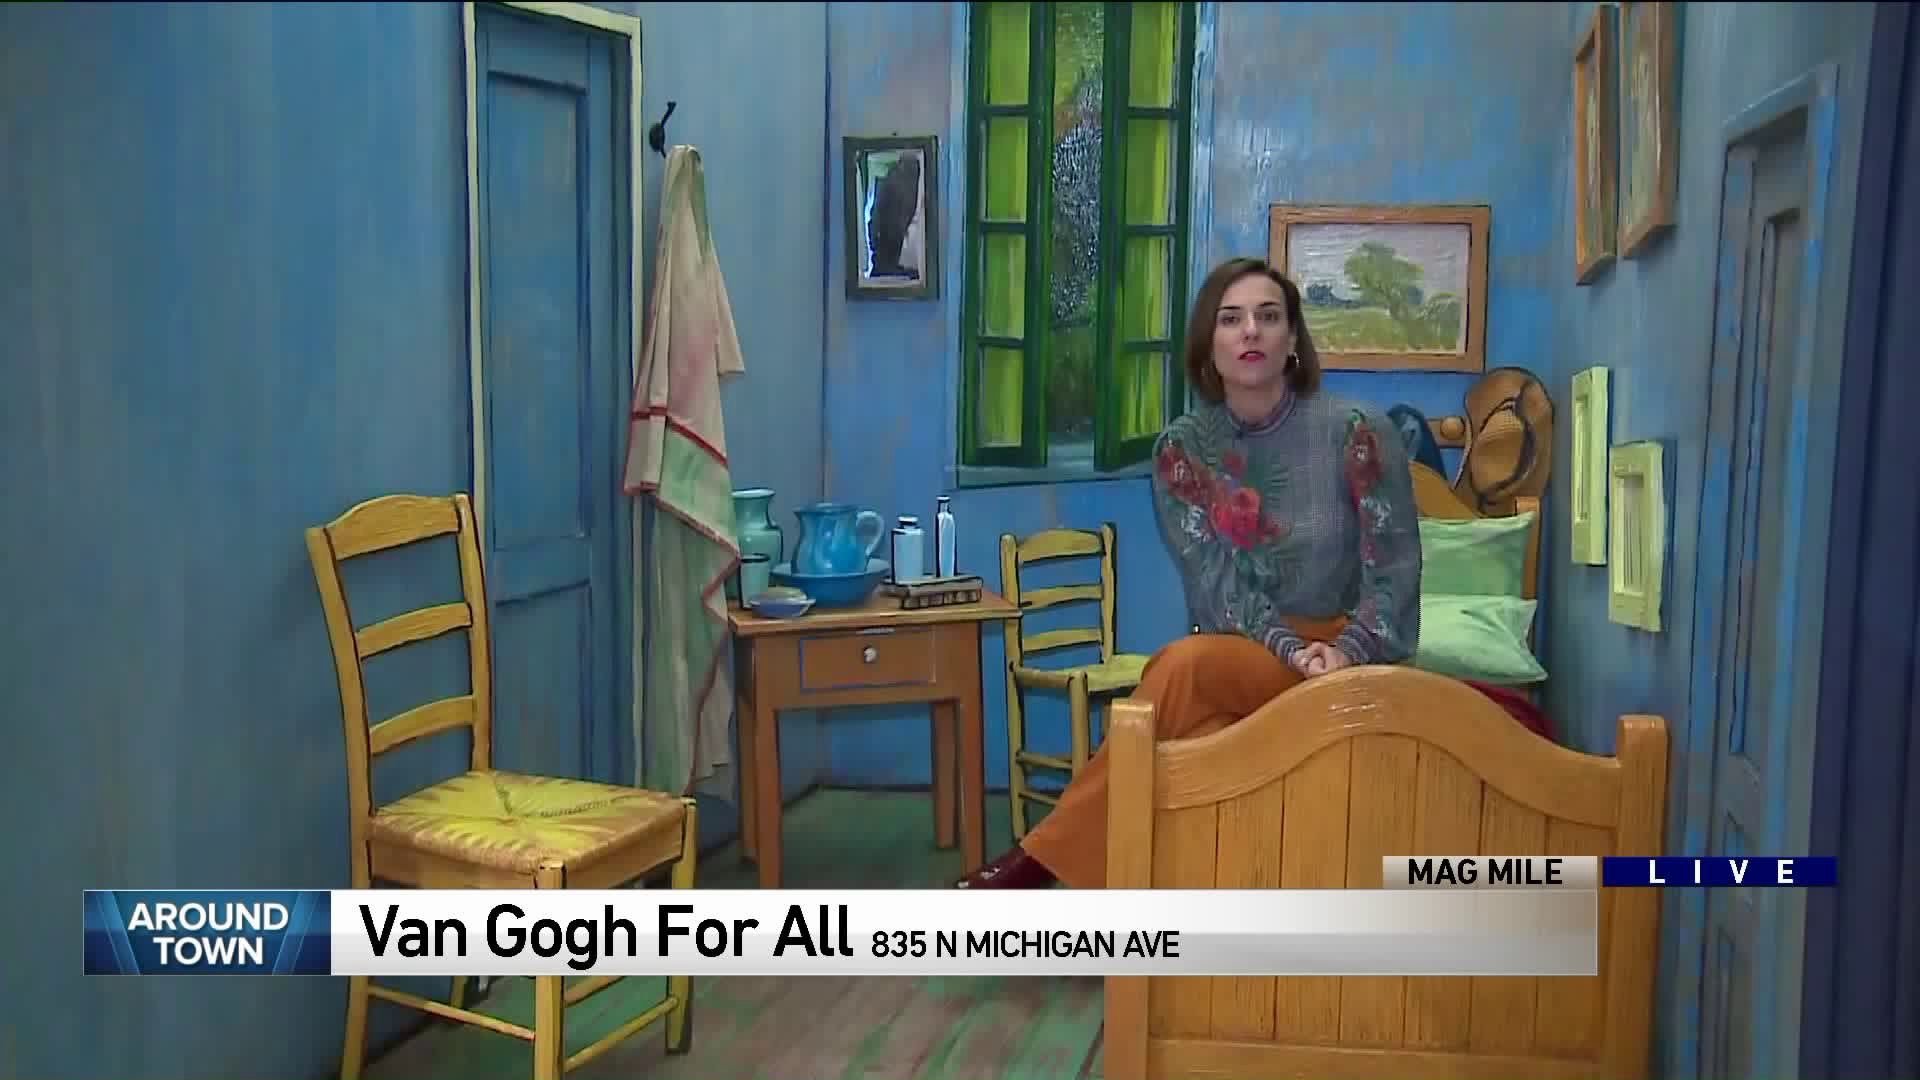 Around Town interacts with art at the Van Gogh for All exhibit